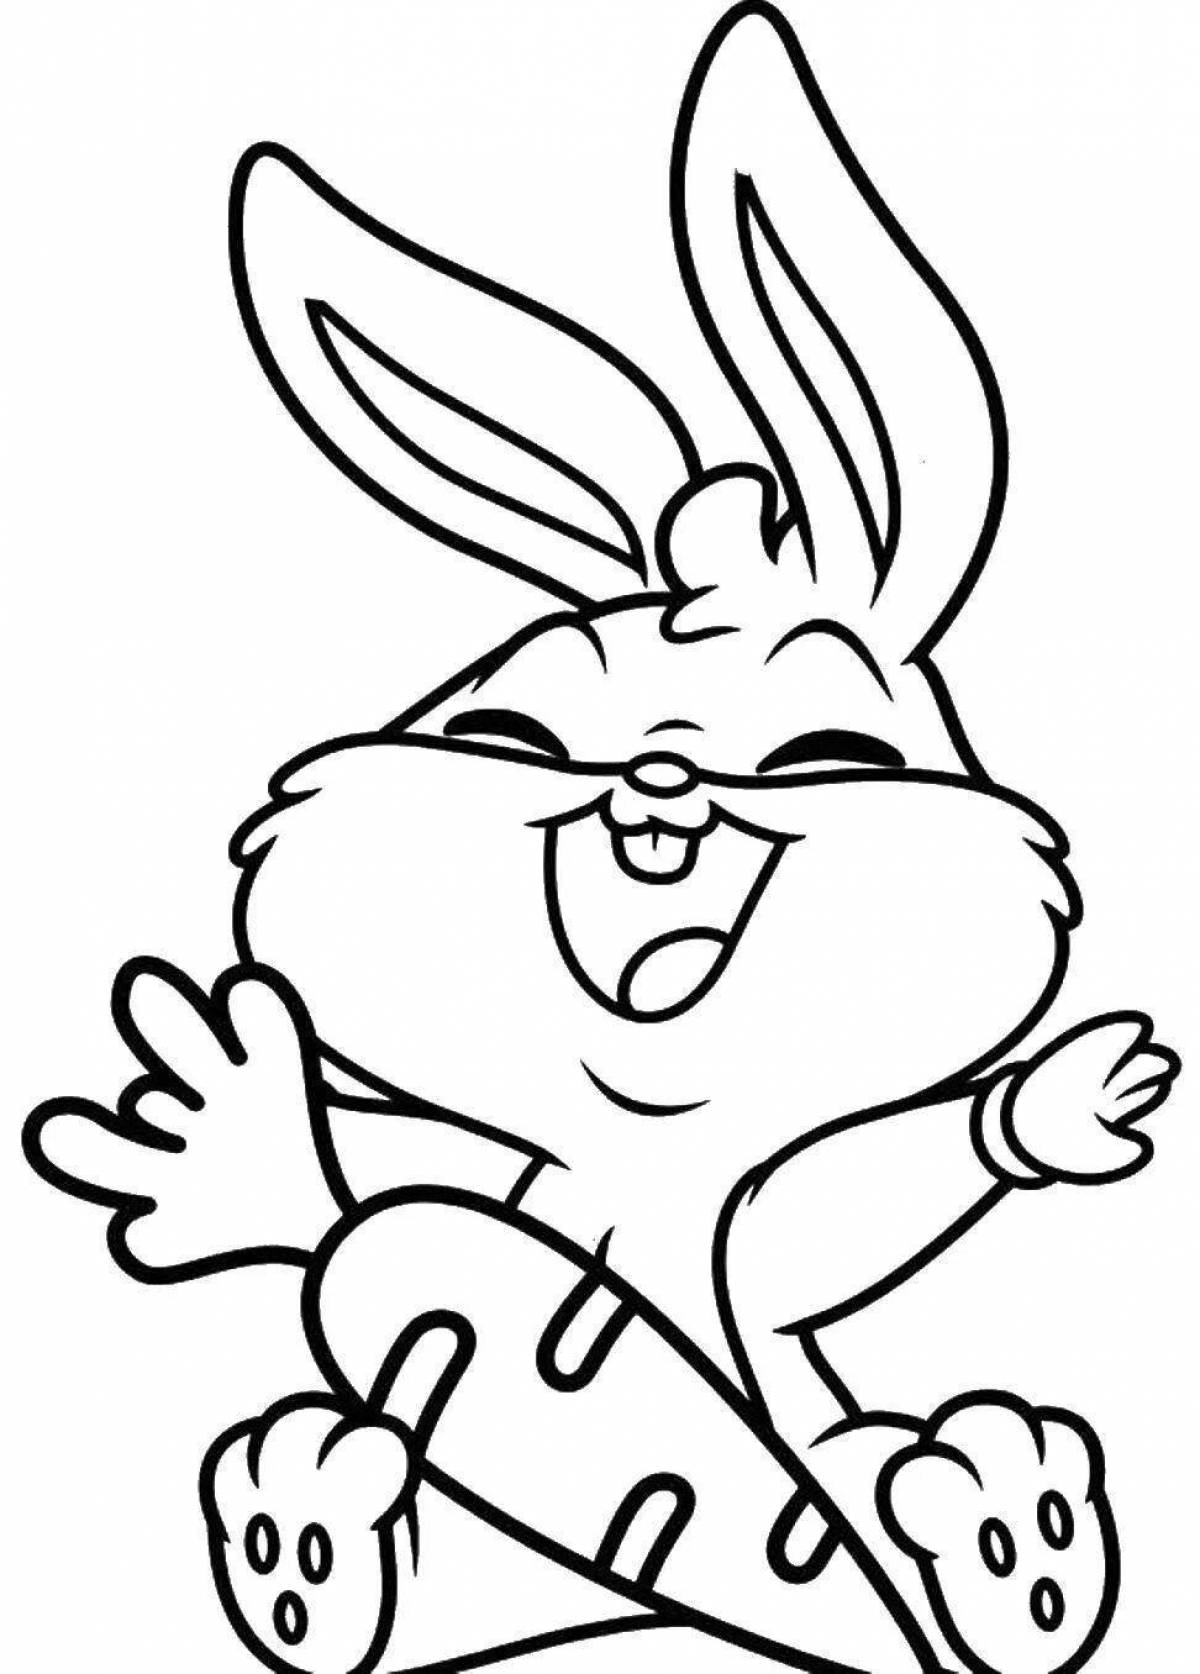 Humorous drawing of a hare